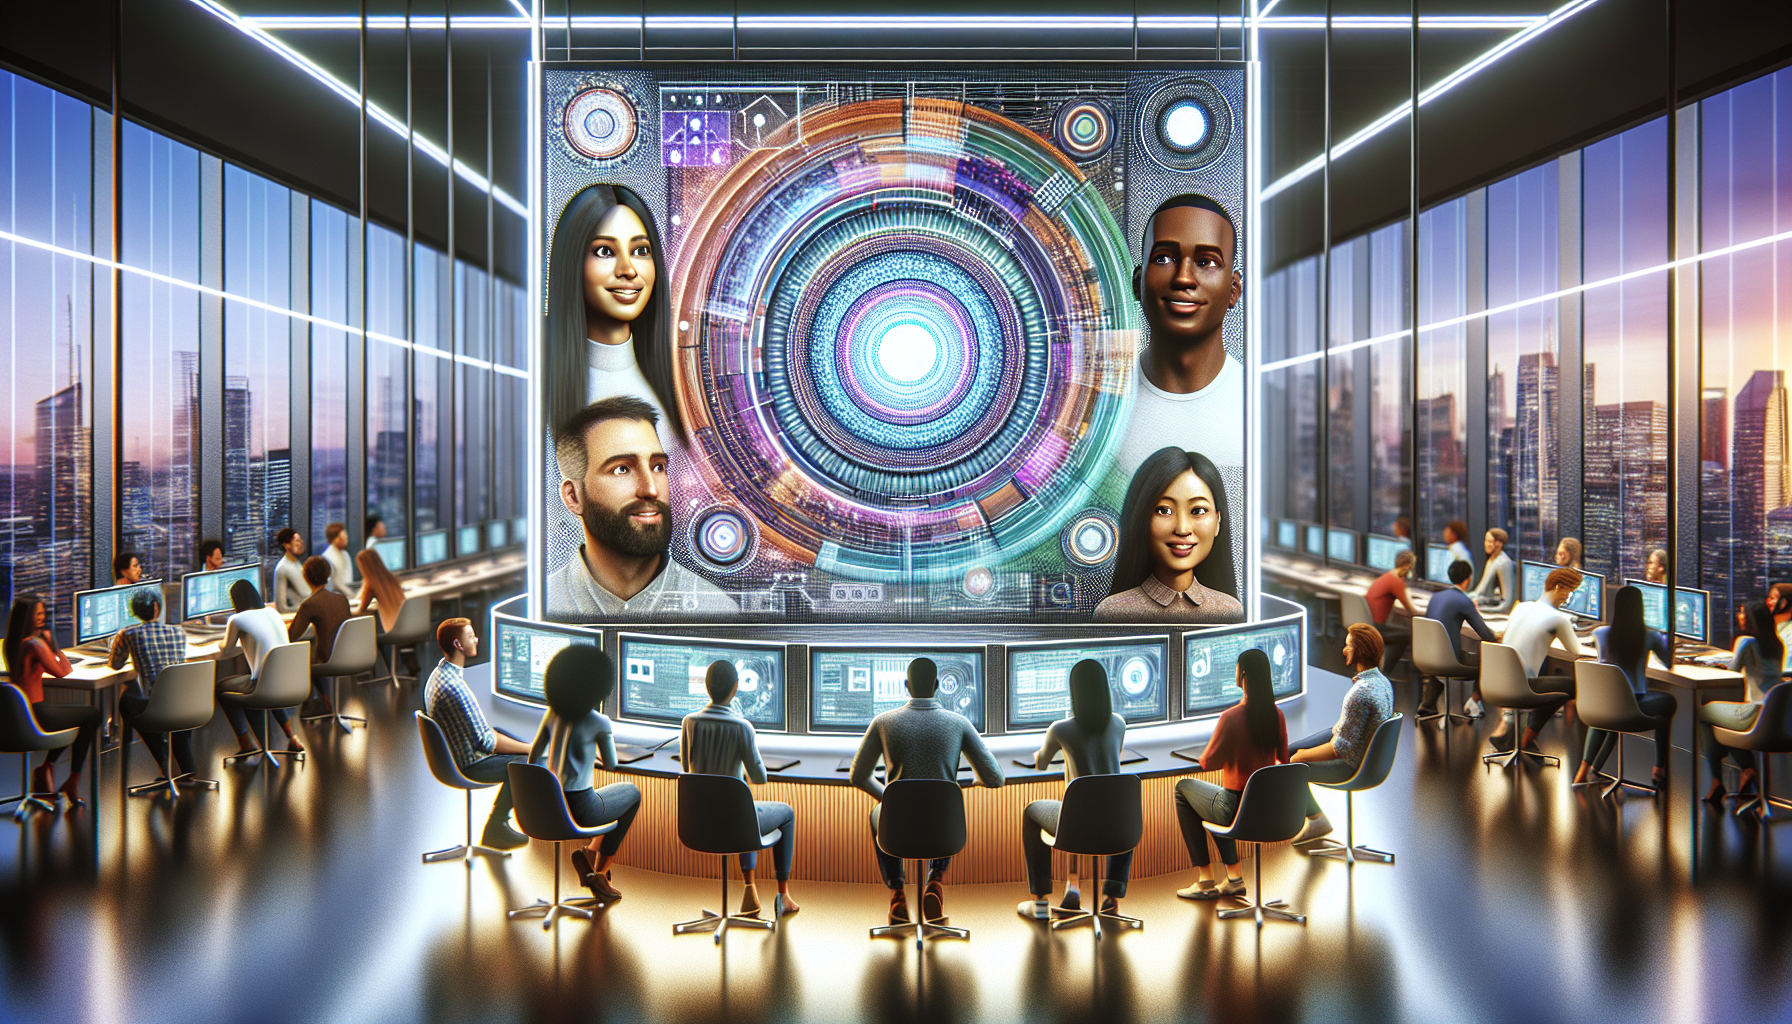 Digital artwork of a diverse group of people sitting around a large, futuristic computer screen displaying the Adobe logo, engaging interactively as AI algorithms animate their videos on the screen, i